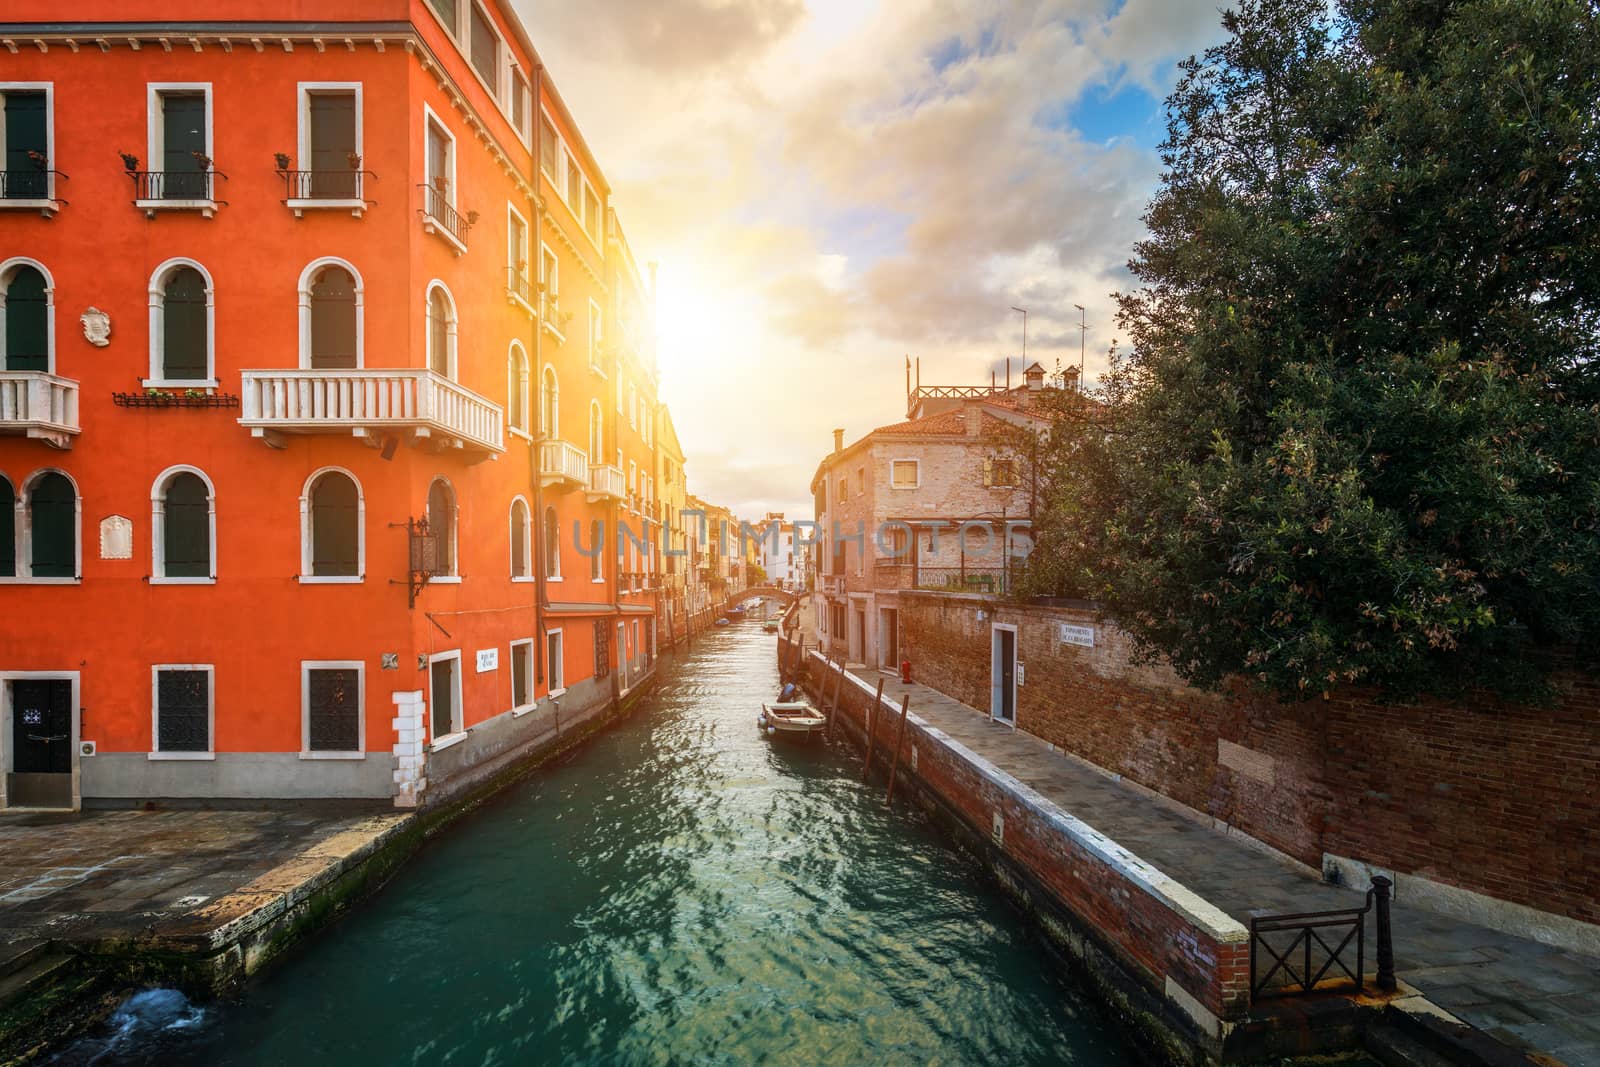 Street canal in Venice, Italy. Narrow canal among old colorful b by DaLiu